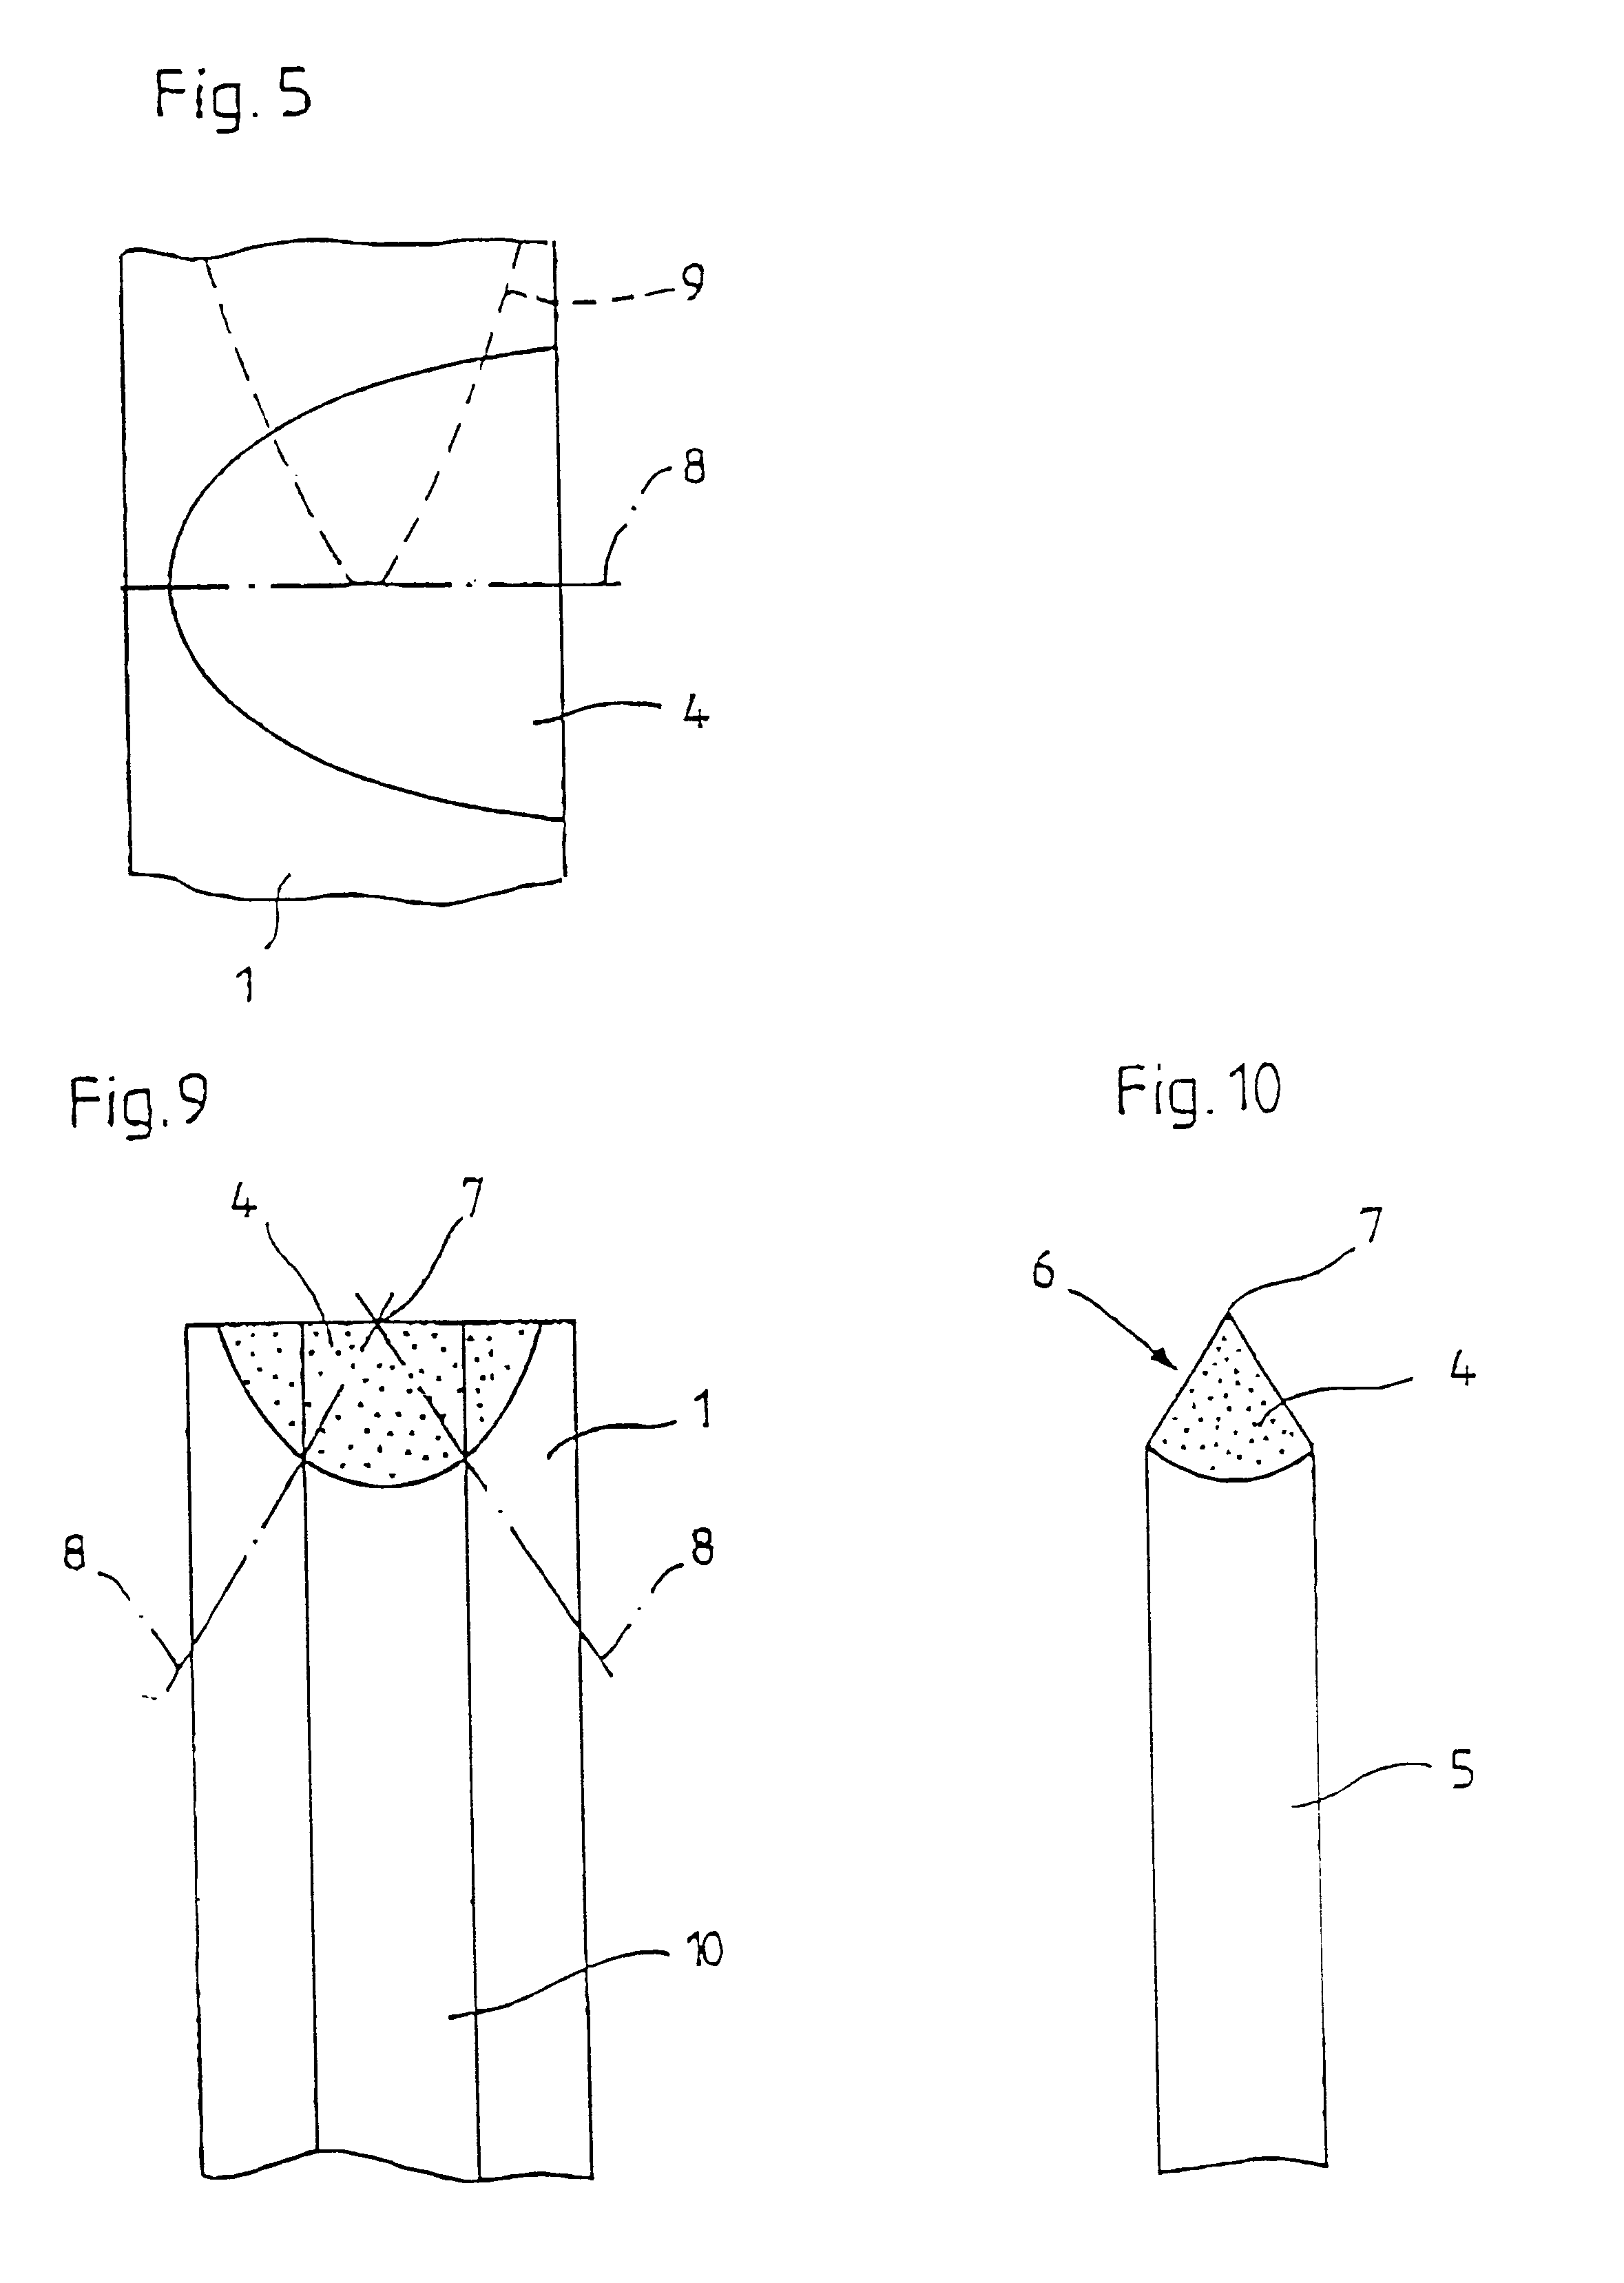 Process for manufacturing a blade of a cutting tool and product manufactured therewith